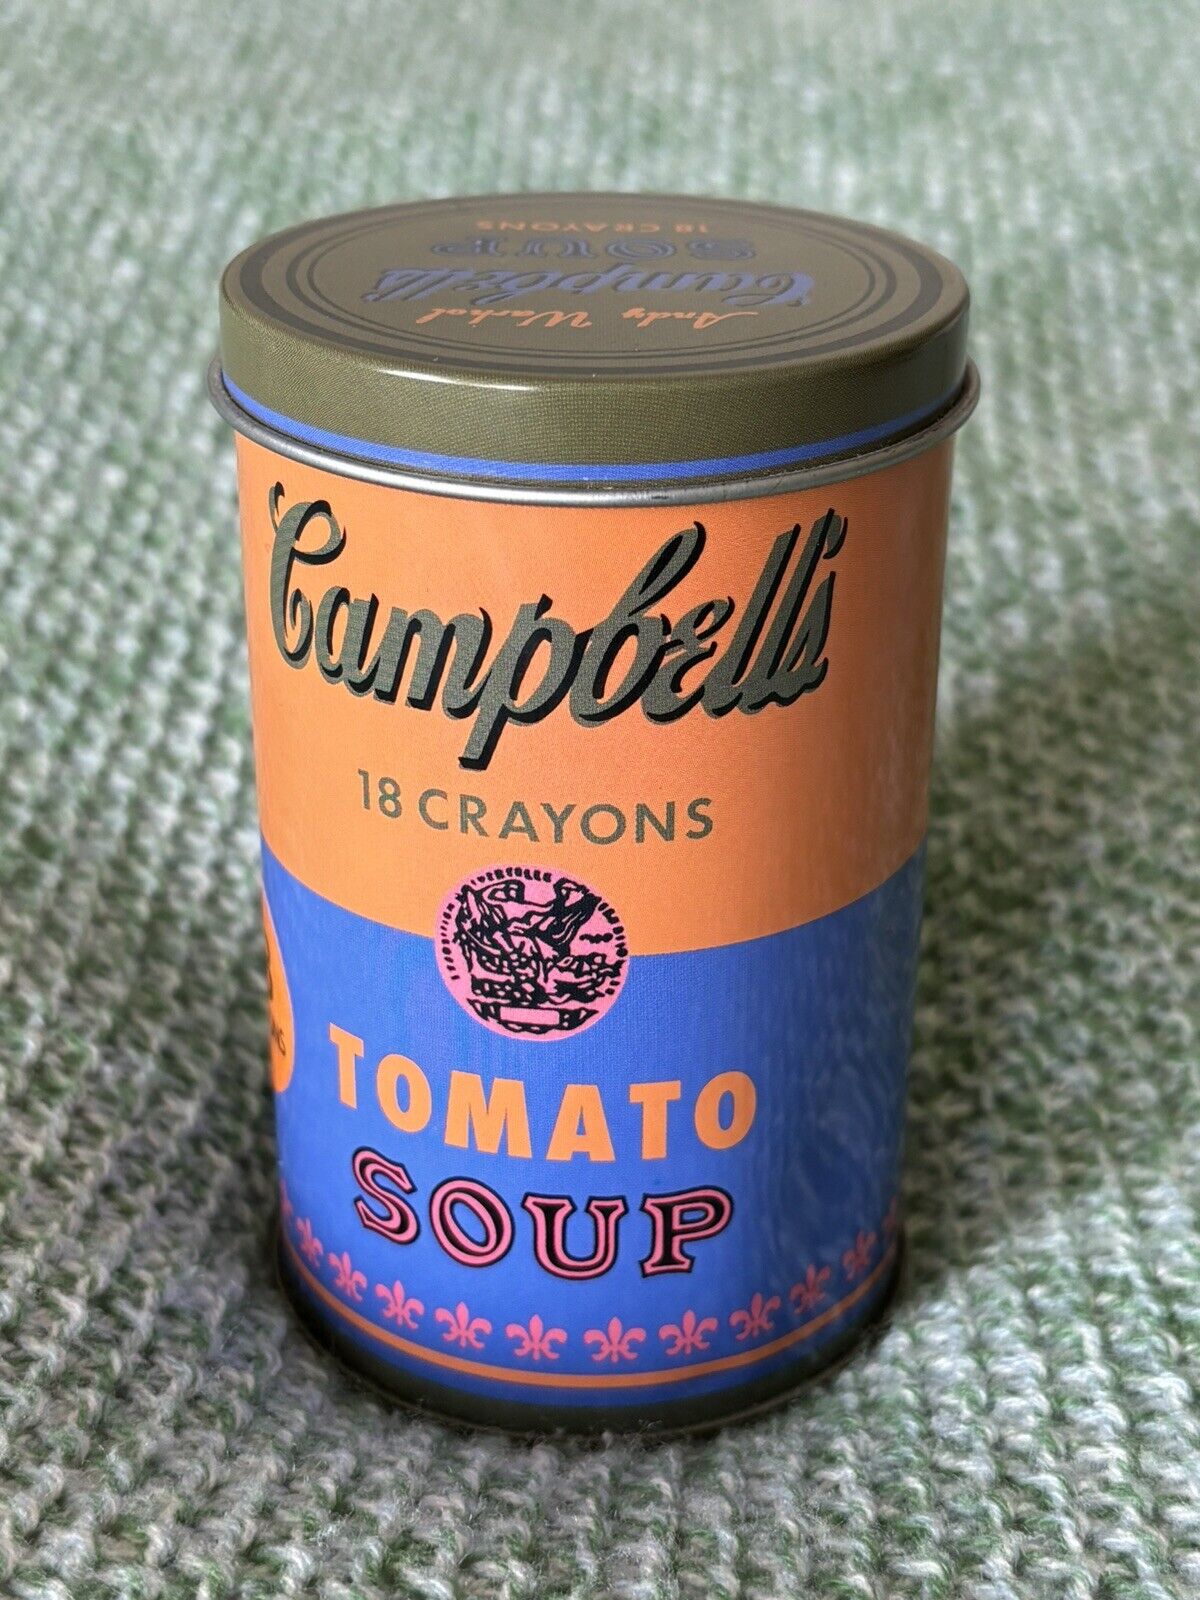 NEW Andy Warhol CAMPBELL’S Soup Can 18 Crayons Orange by Mudpuppy